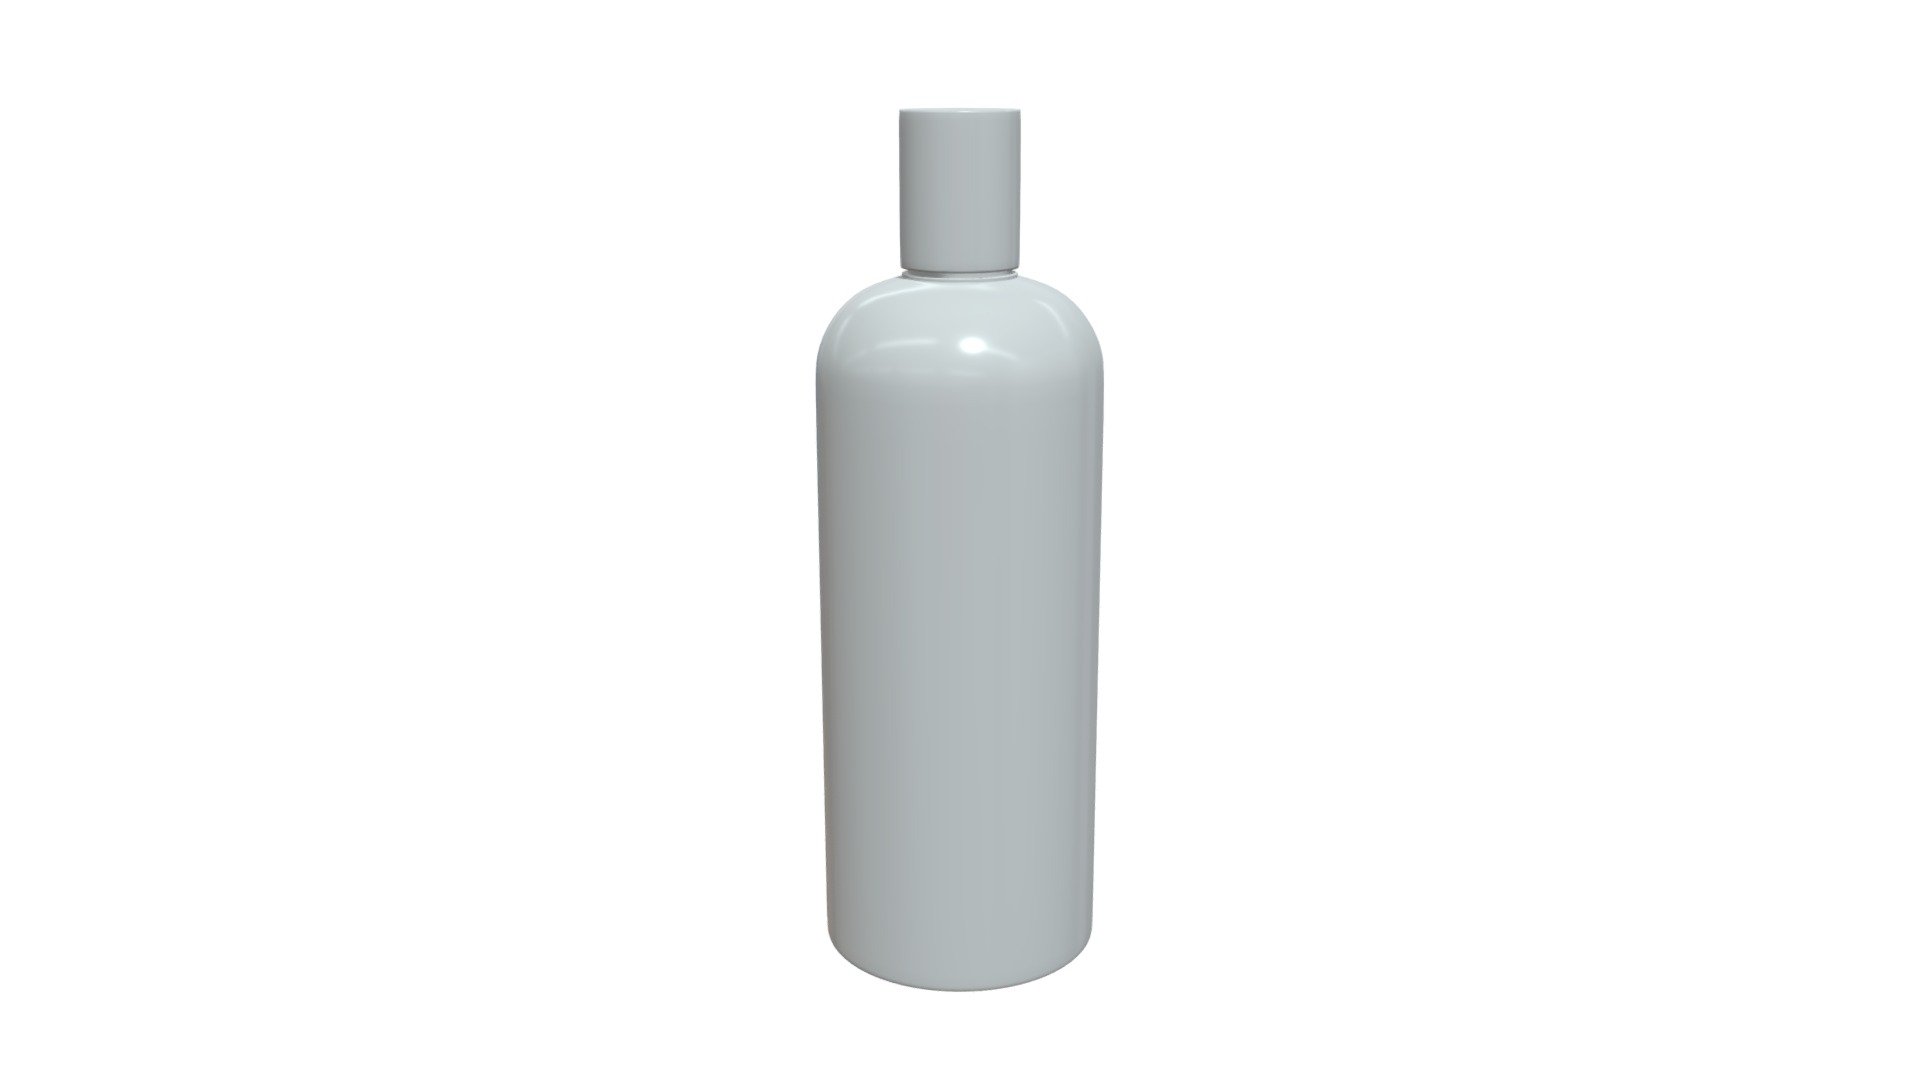 Created in 3ds max 2016
Saved to 3ds max 2013
Units: Centimeters
Dimension: 6.26 x 6.26 x 18.79
Polys: 6400
XForm: Yes
Box Trick: Yes
Model Parts: 1 - Shampoo bottle - Buy Royalty Free 3D model by HQ3DMOD (@AivisAstics) 3d model